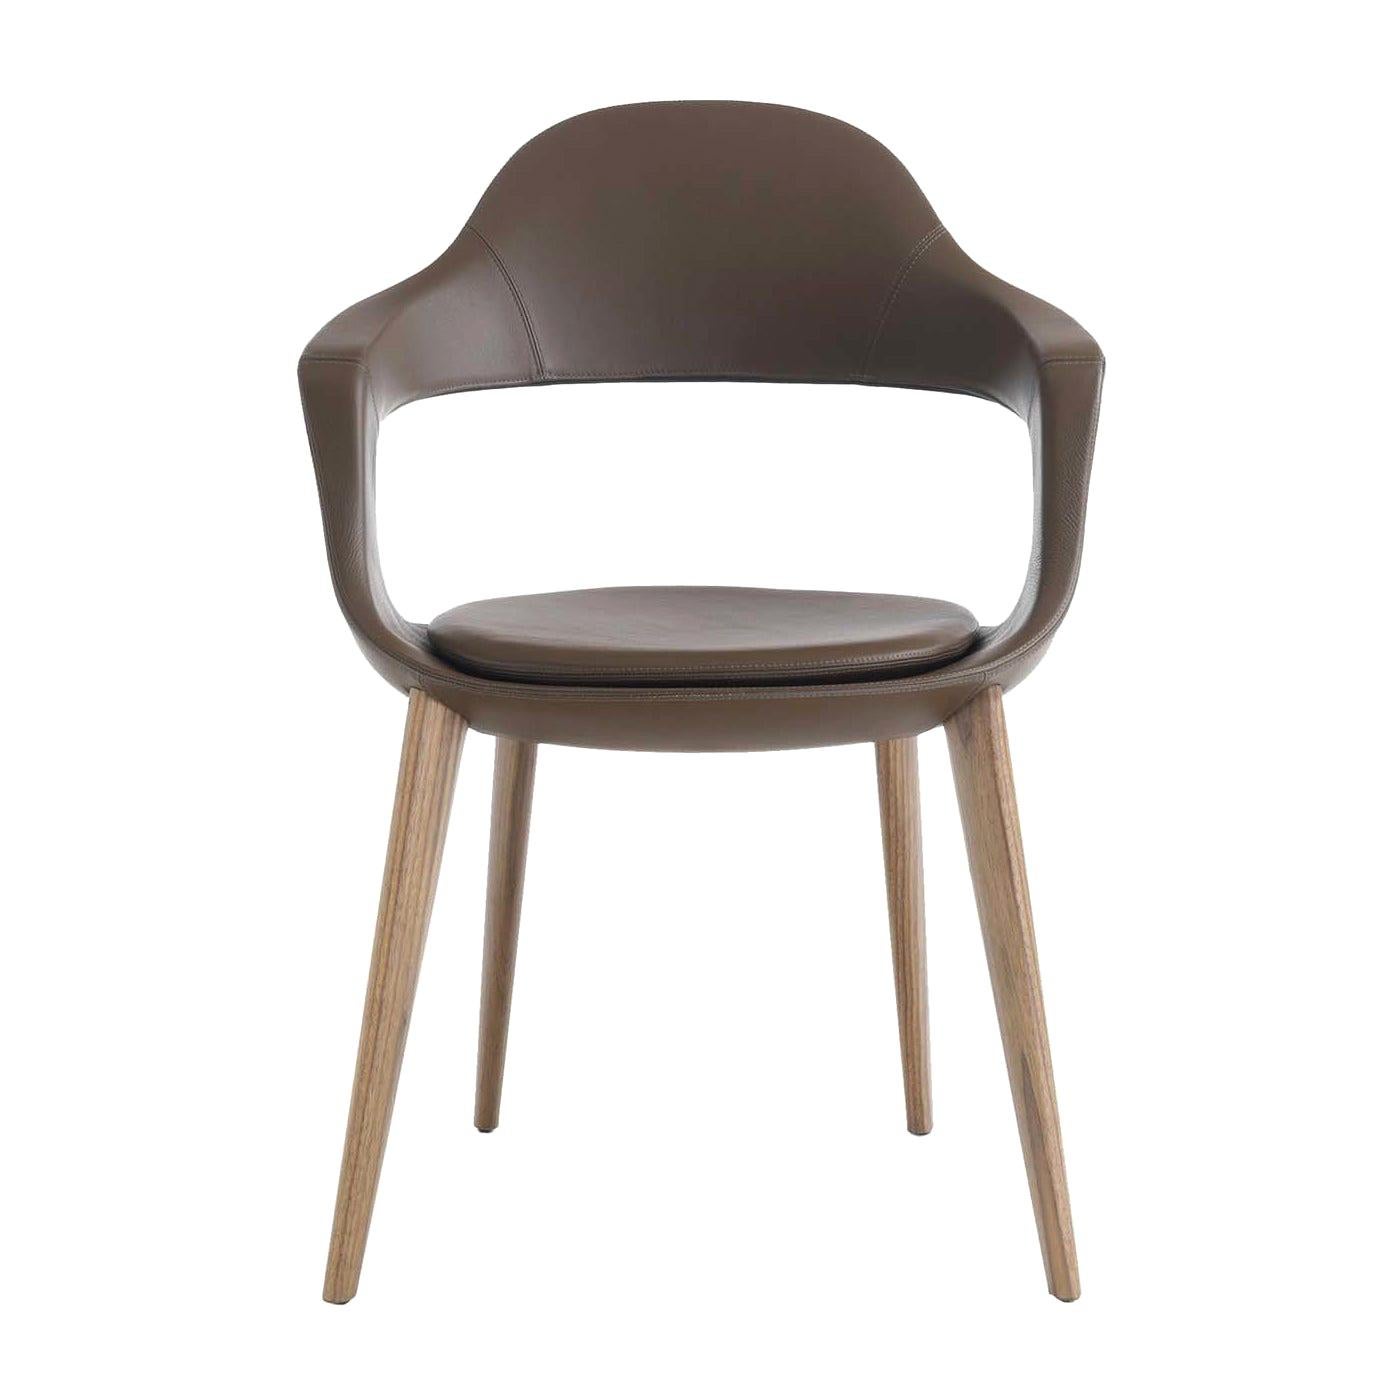 Frenchkiss High-Backed Wooden-Legged Chair by Stefano Bigi